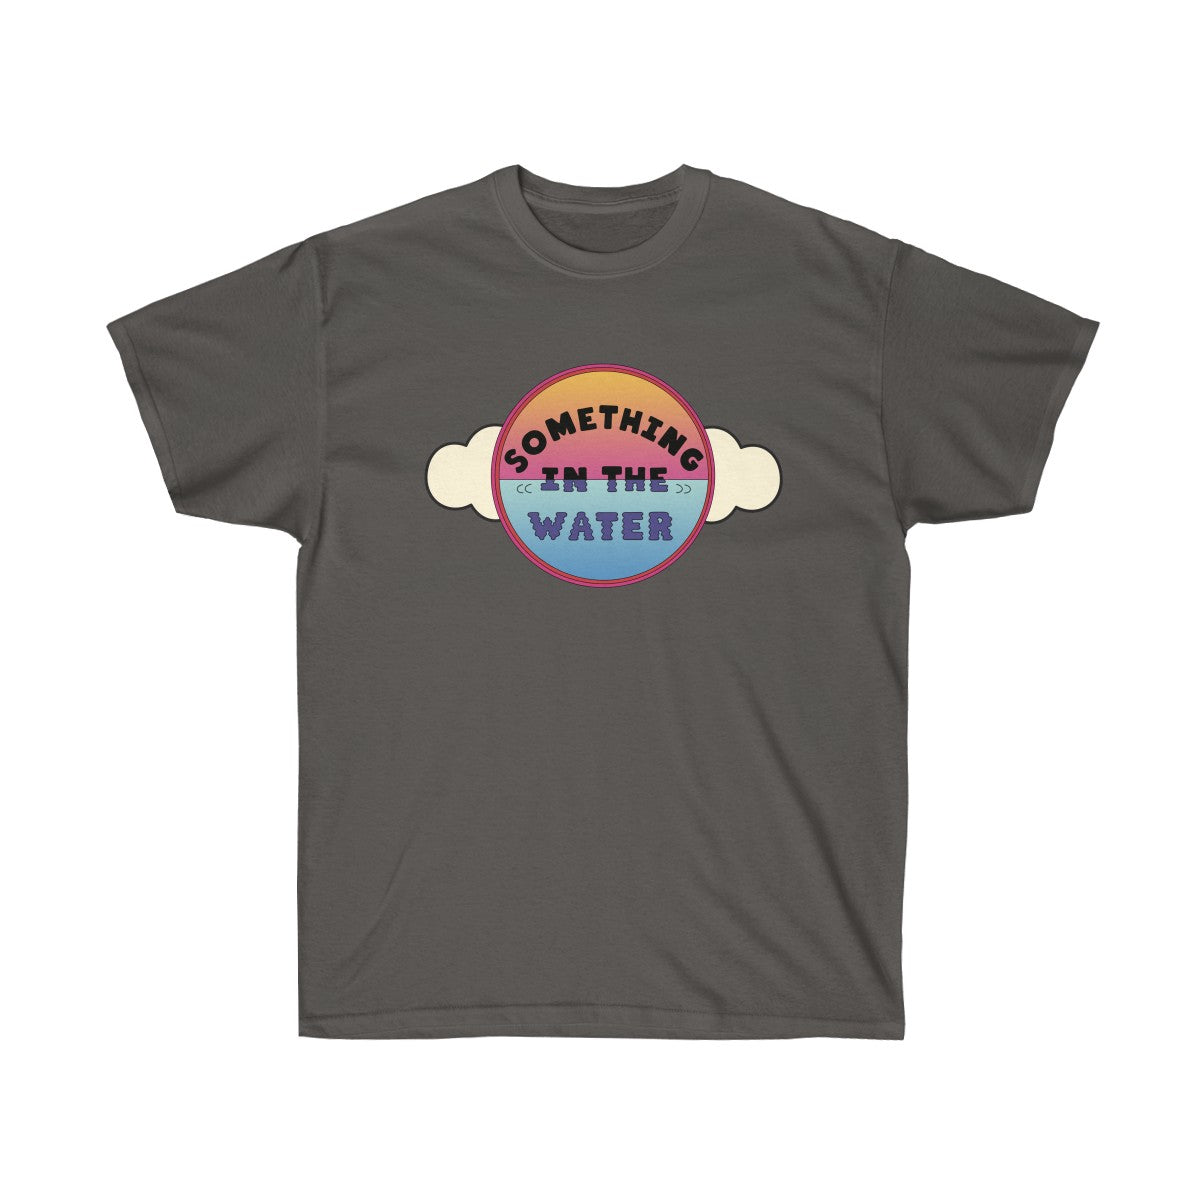 Something in the water Unisex Ultra Cotton Tee - Pharrell Williams festival inspired-Charcoal-S-Archethype